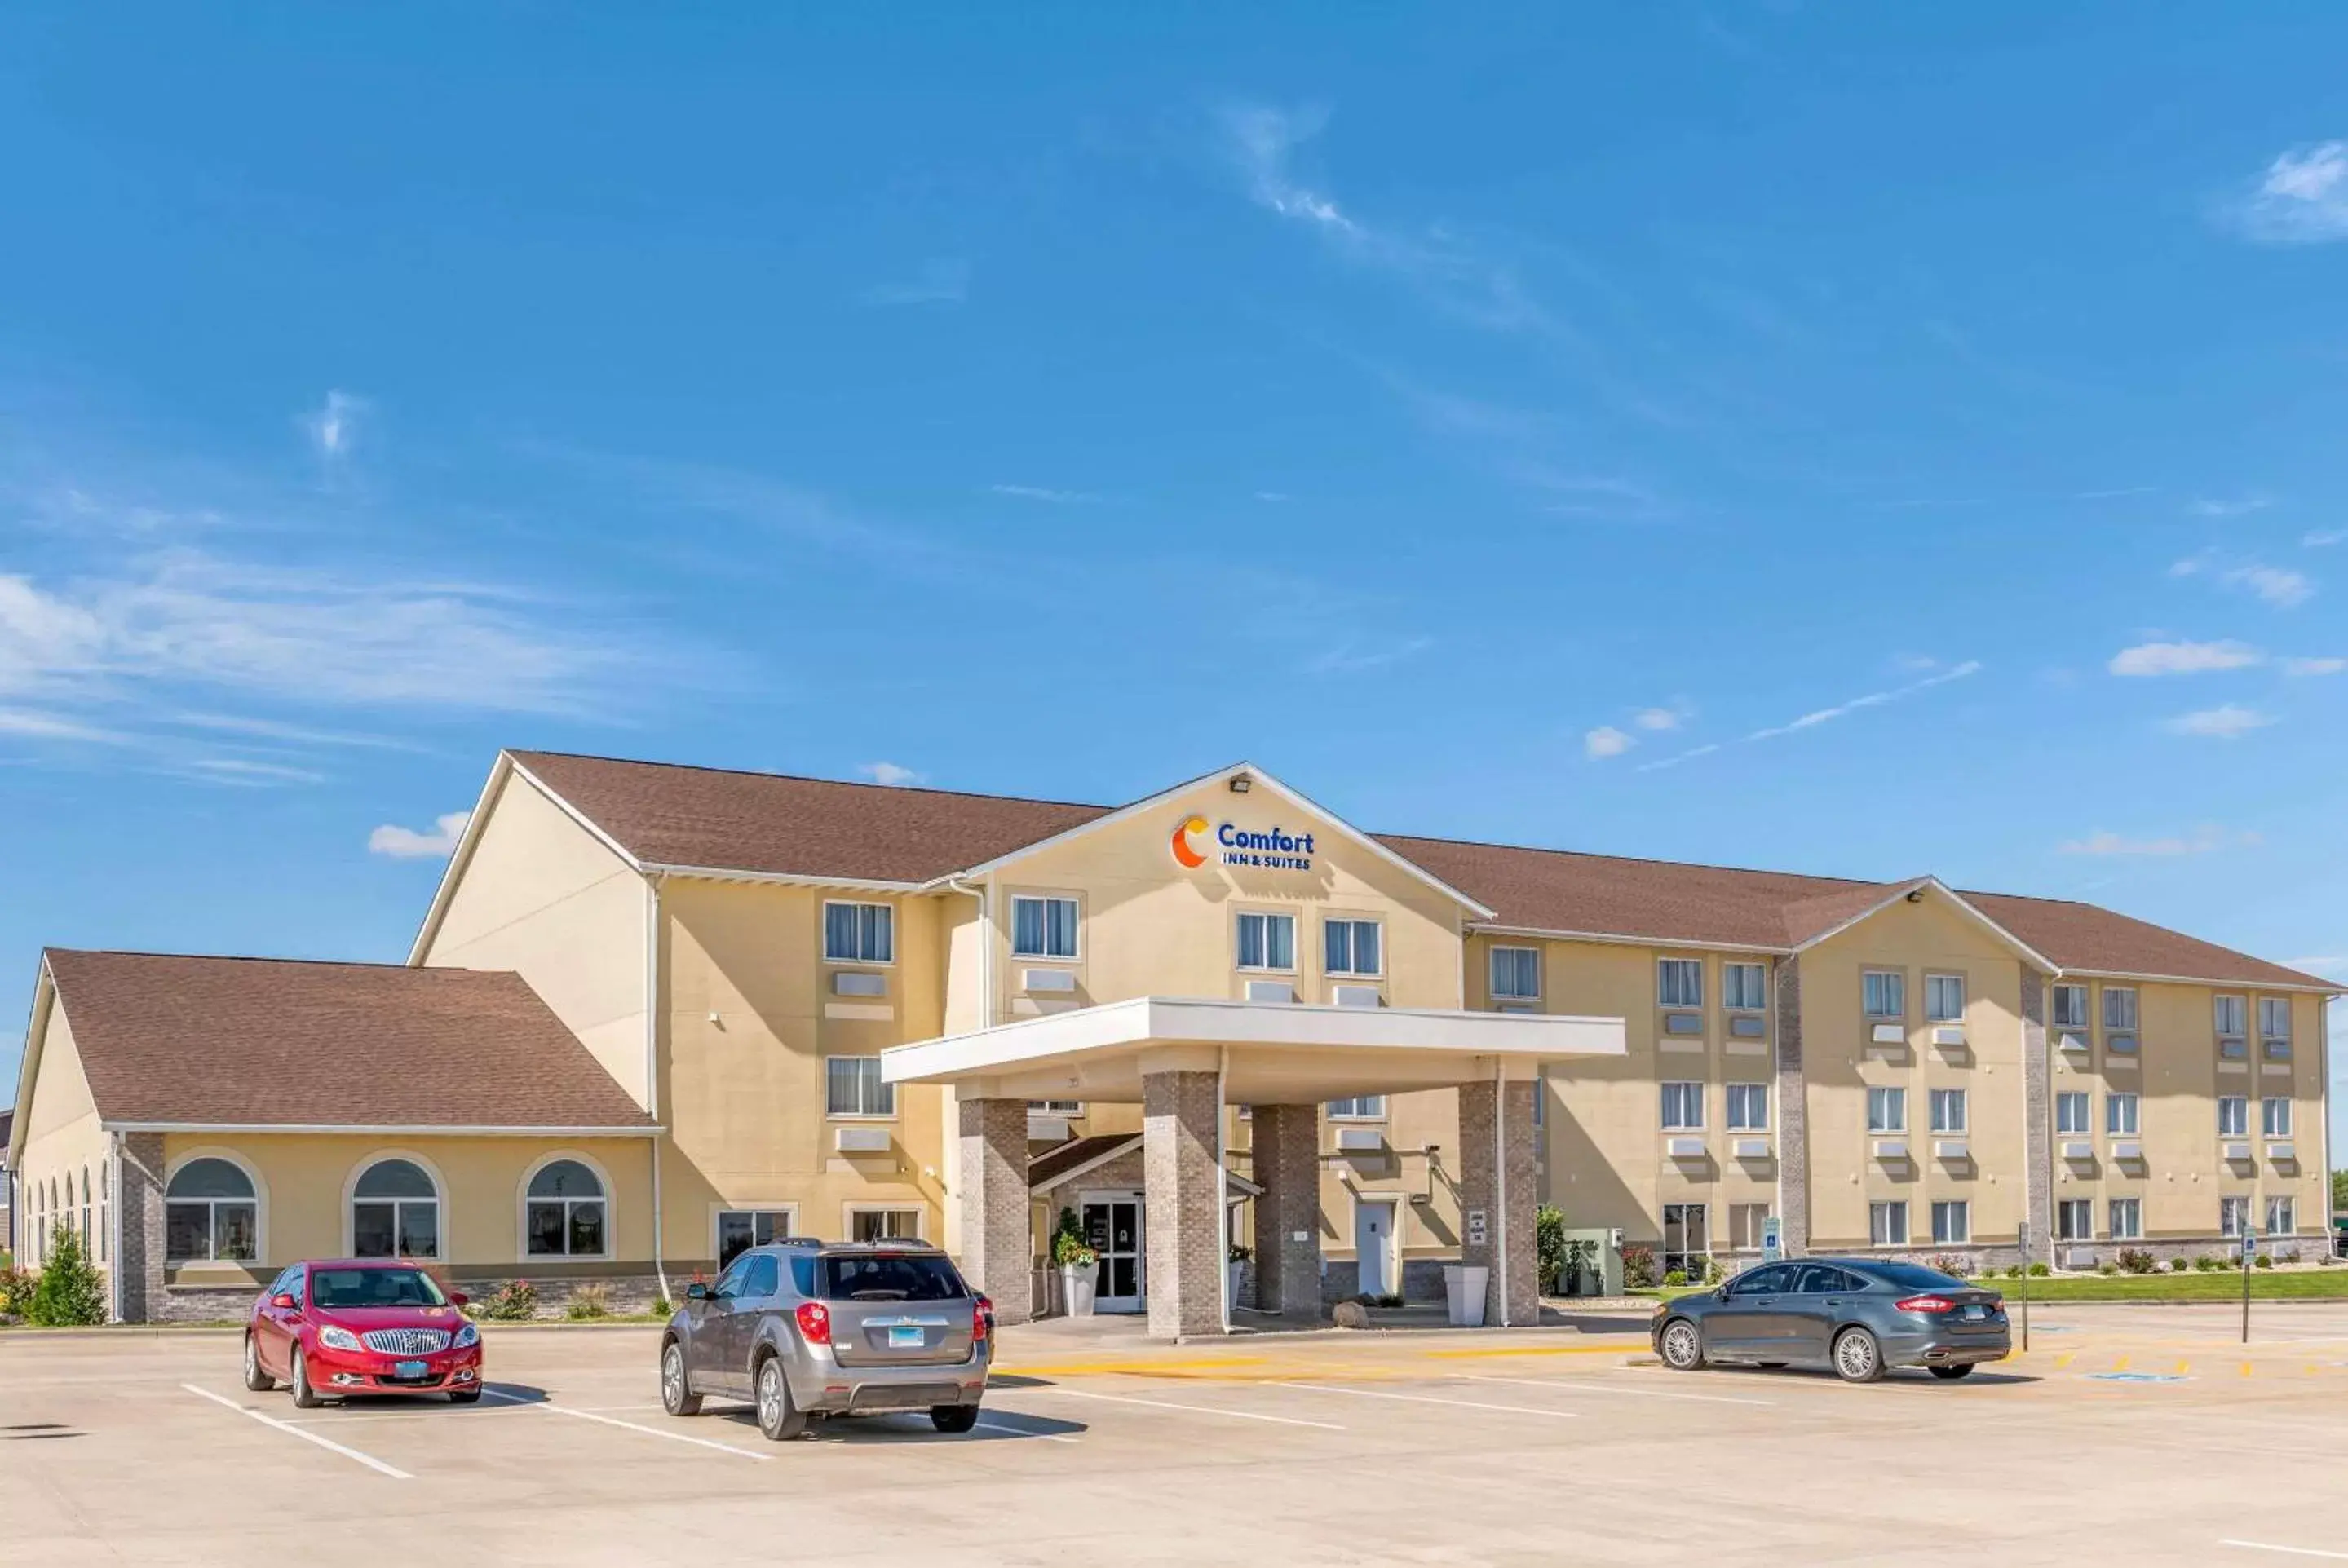 Property Building in Comfort Inn & Suites near Route 66 Award Winning Gold Hotel 2021